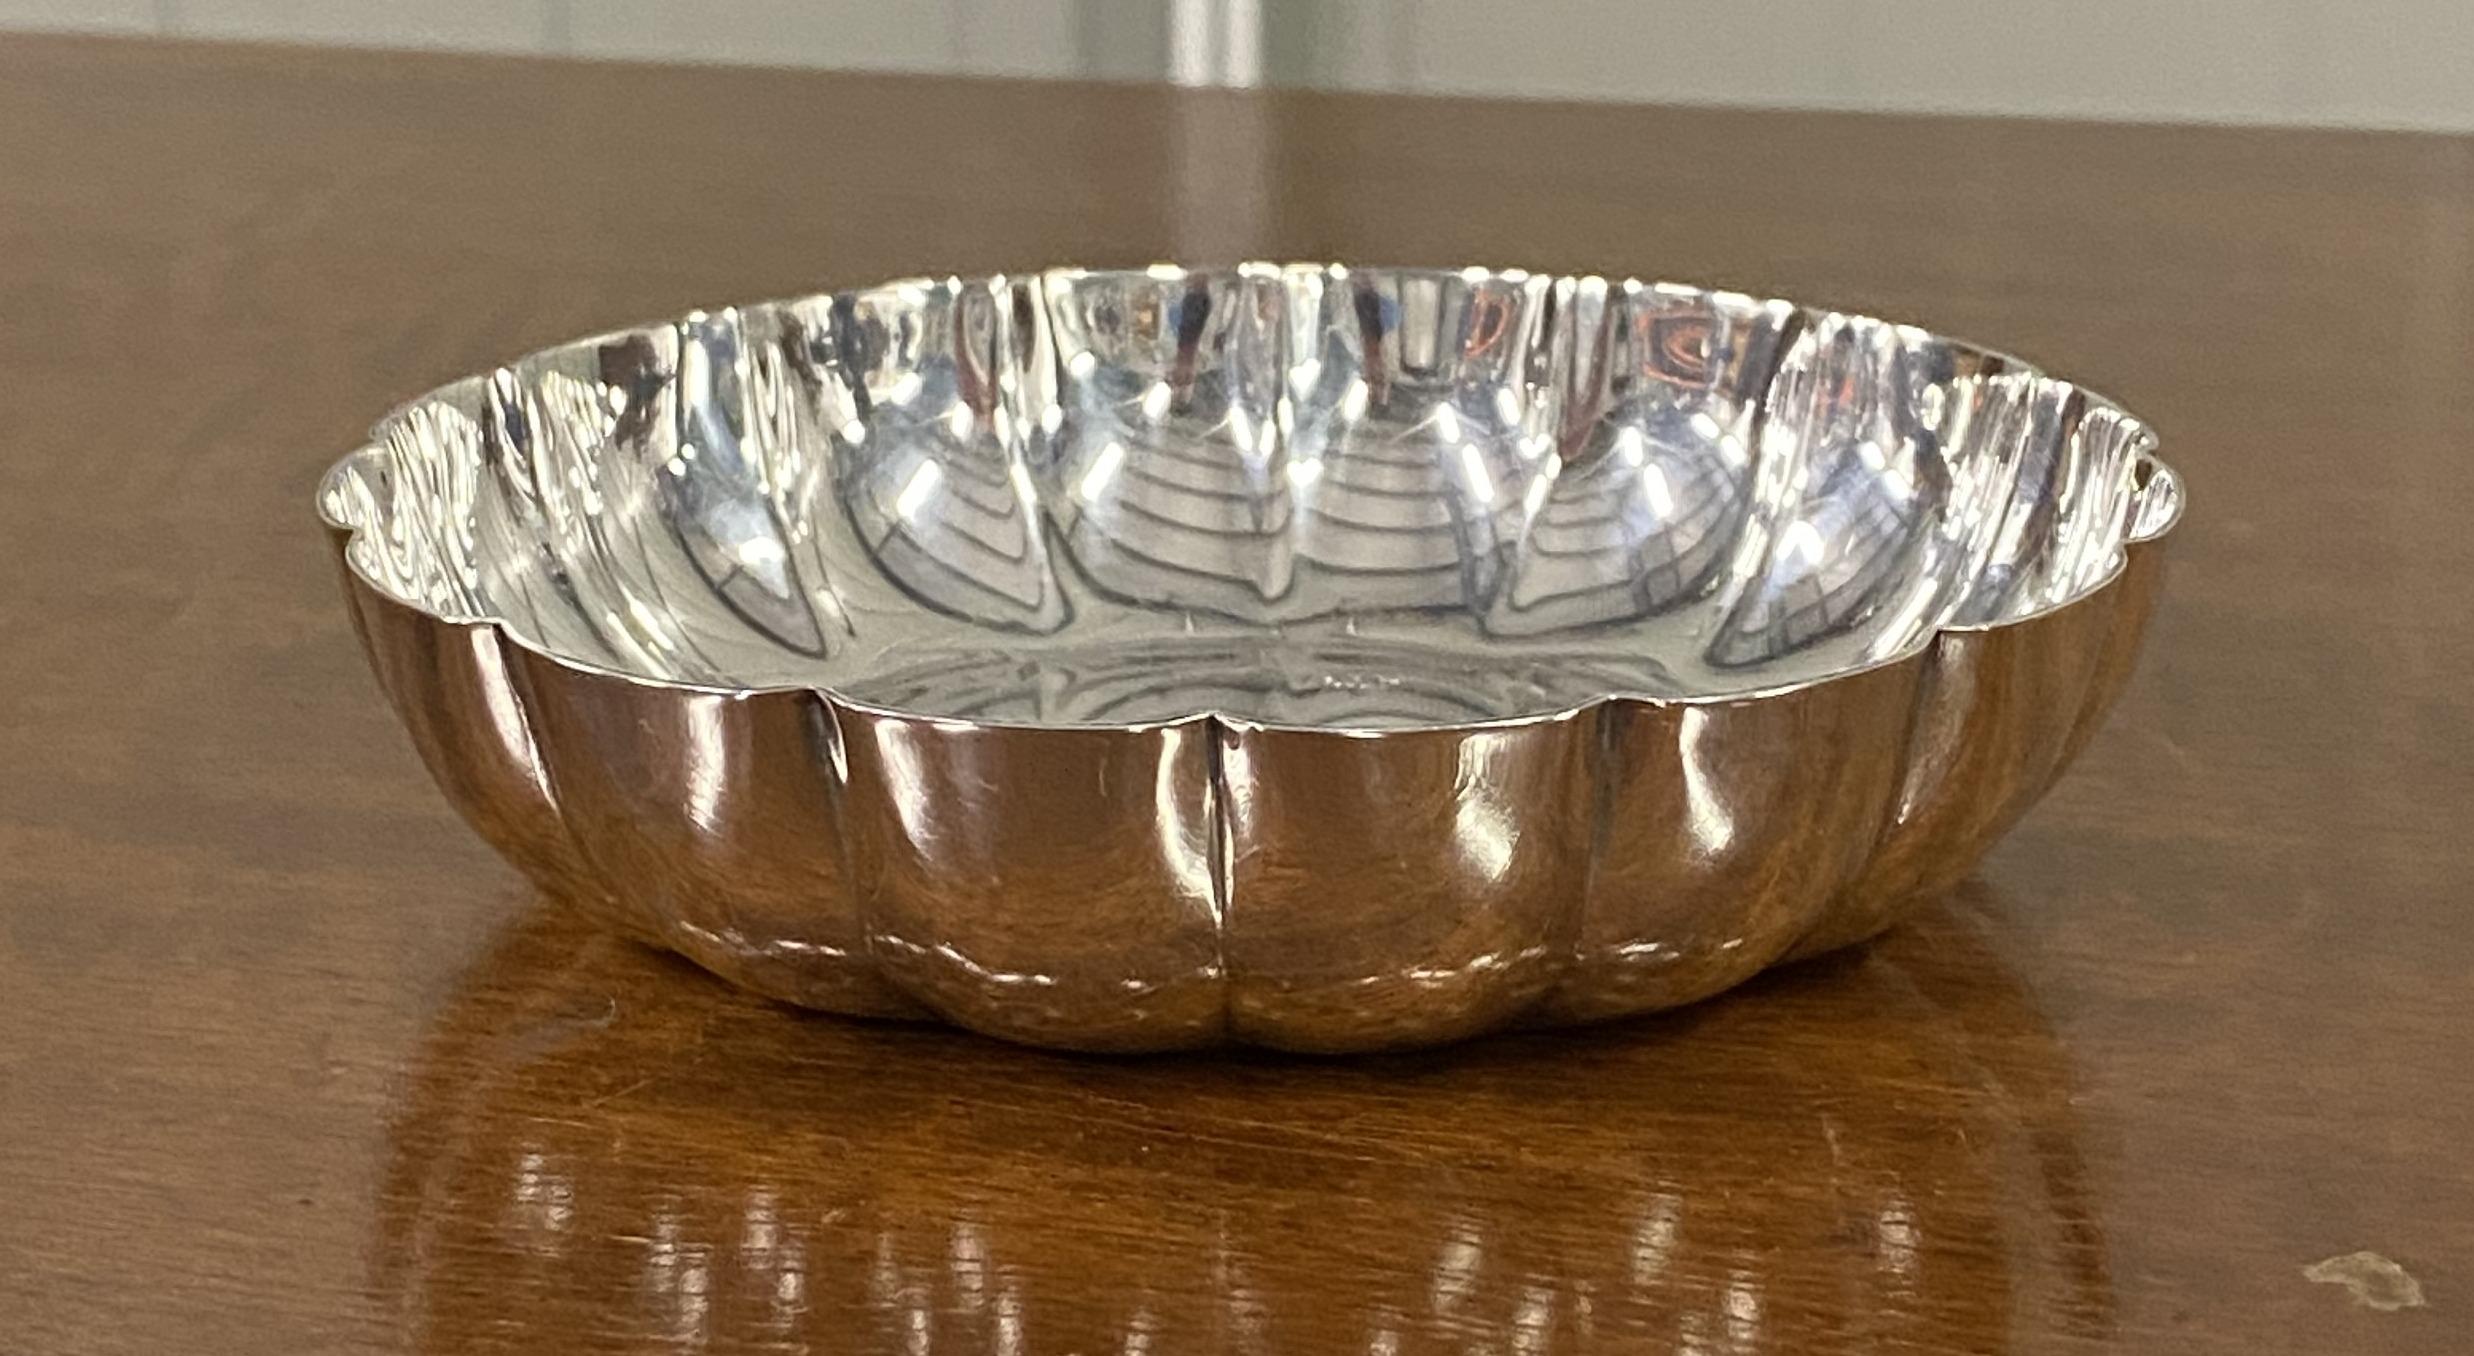 Stunning Rare 1979 Solid Sterling Silver Strawberry Dish or Bowl from Sheffield For Sale 8